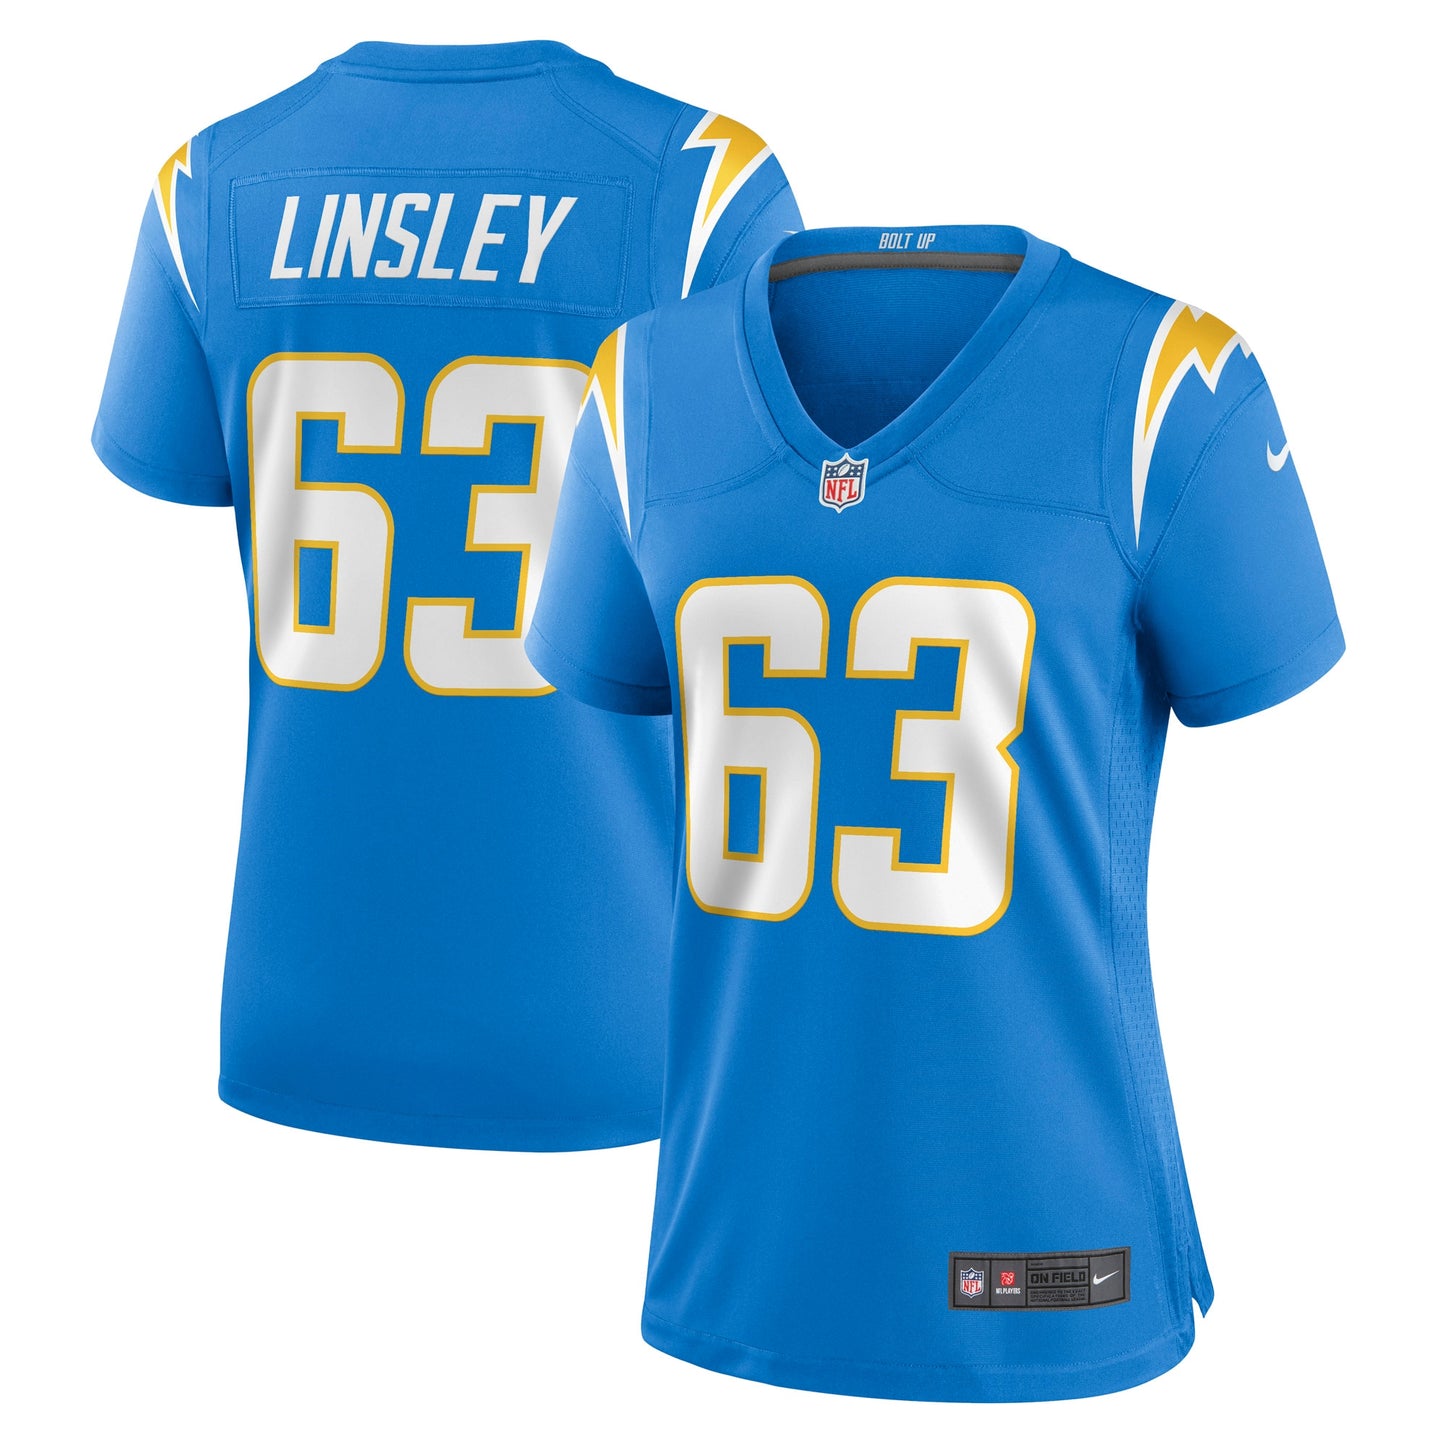 Corey Linsley Los Angeles Chargers Nike Women's Game Player Jersey - Powder Blue